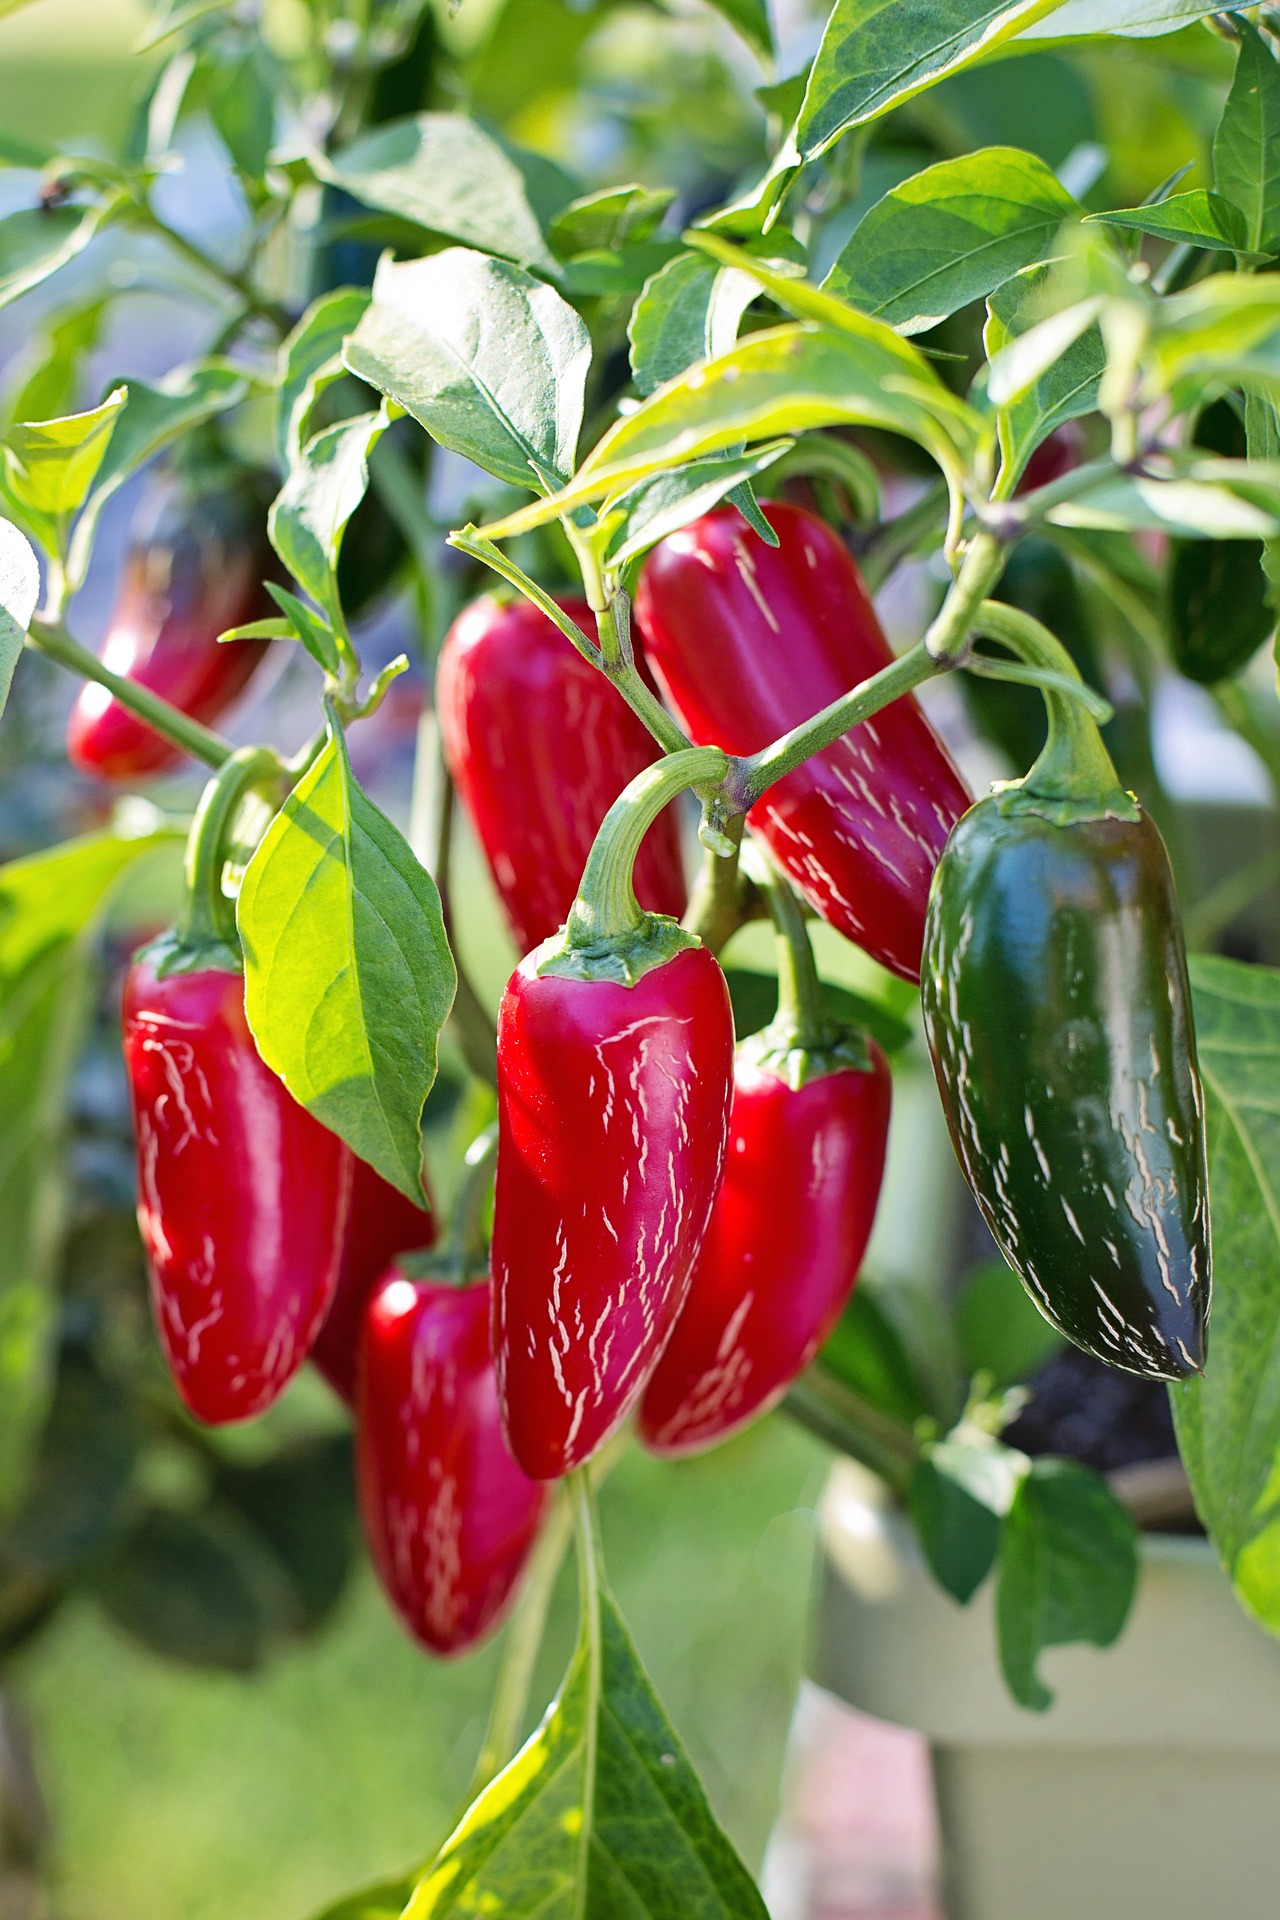 Do Jalapenos Get Hotter When They Turn Red?